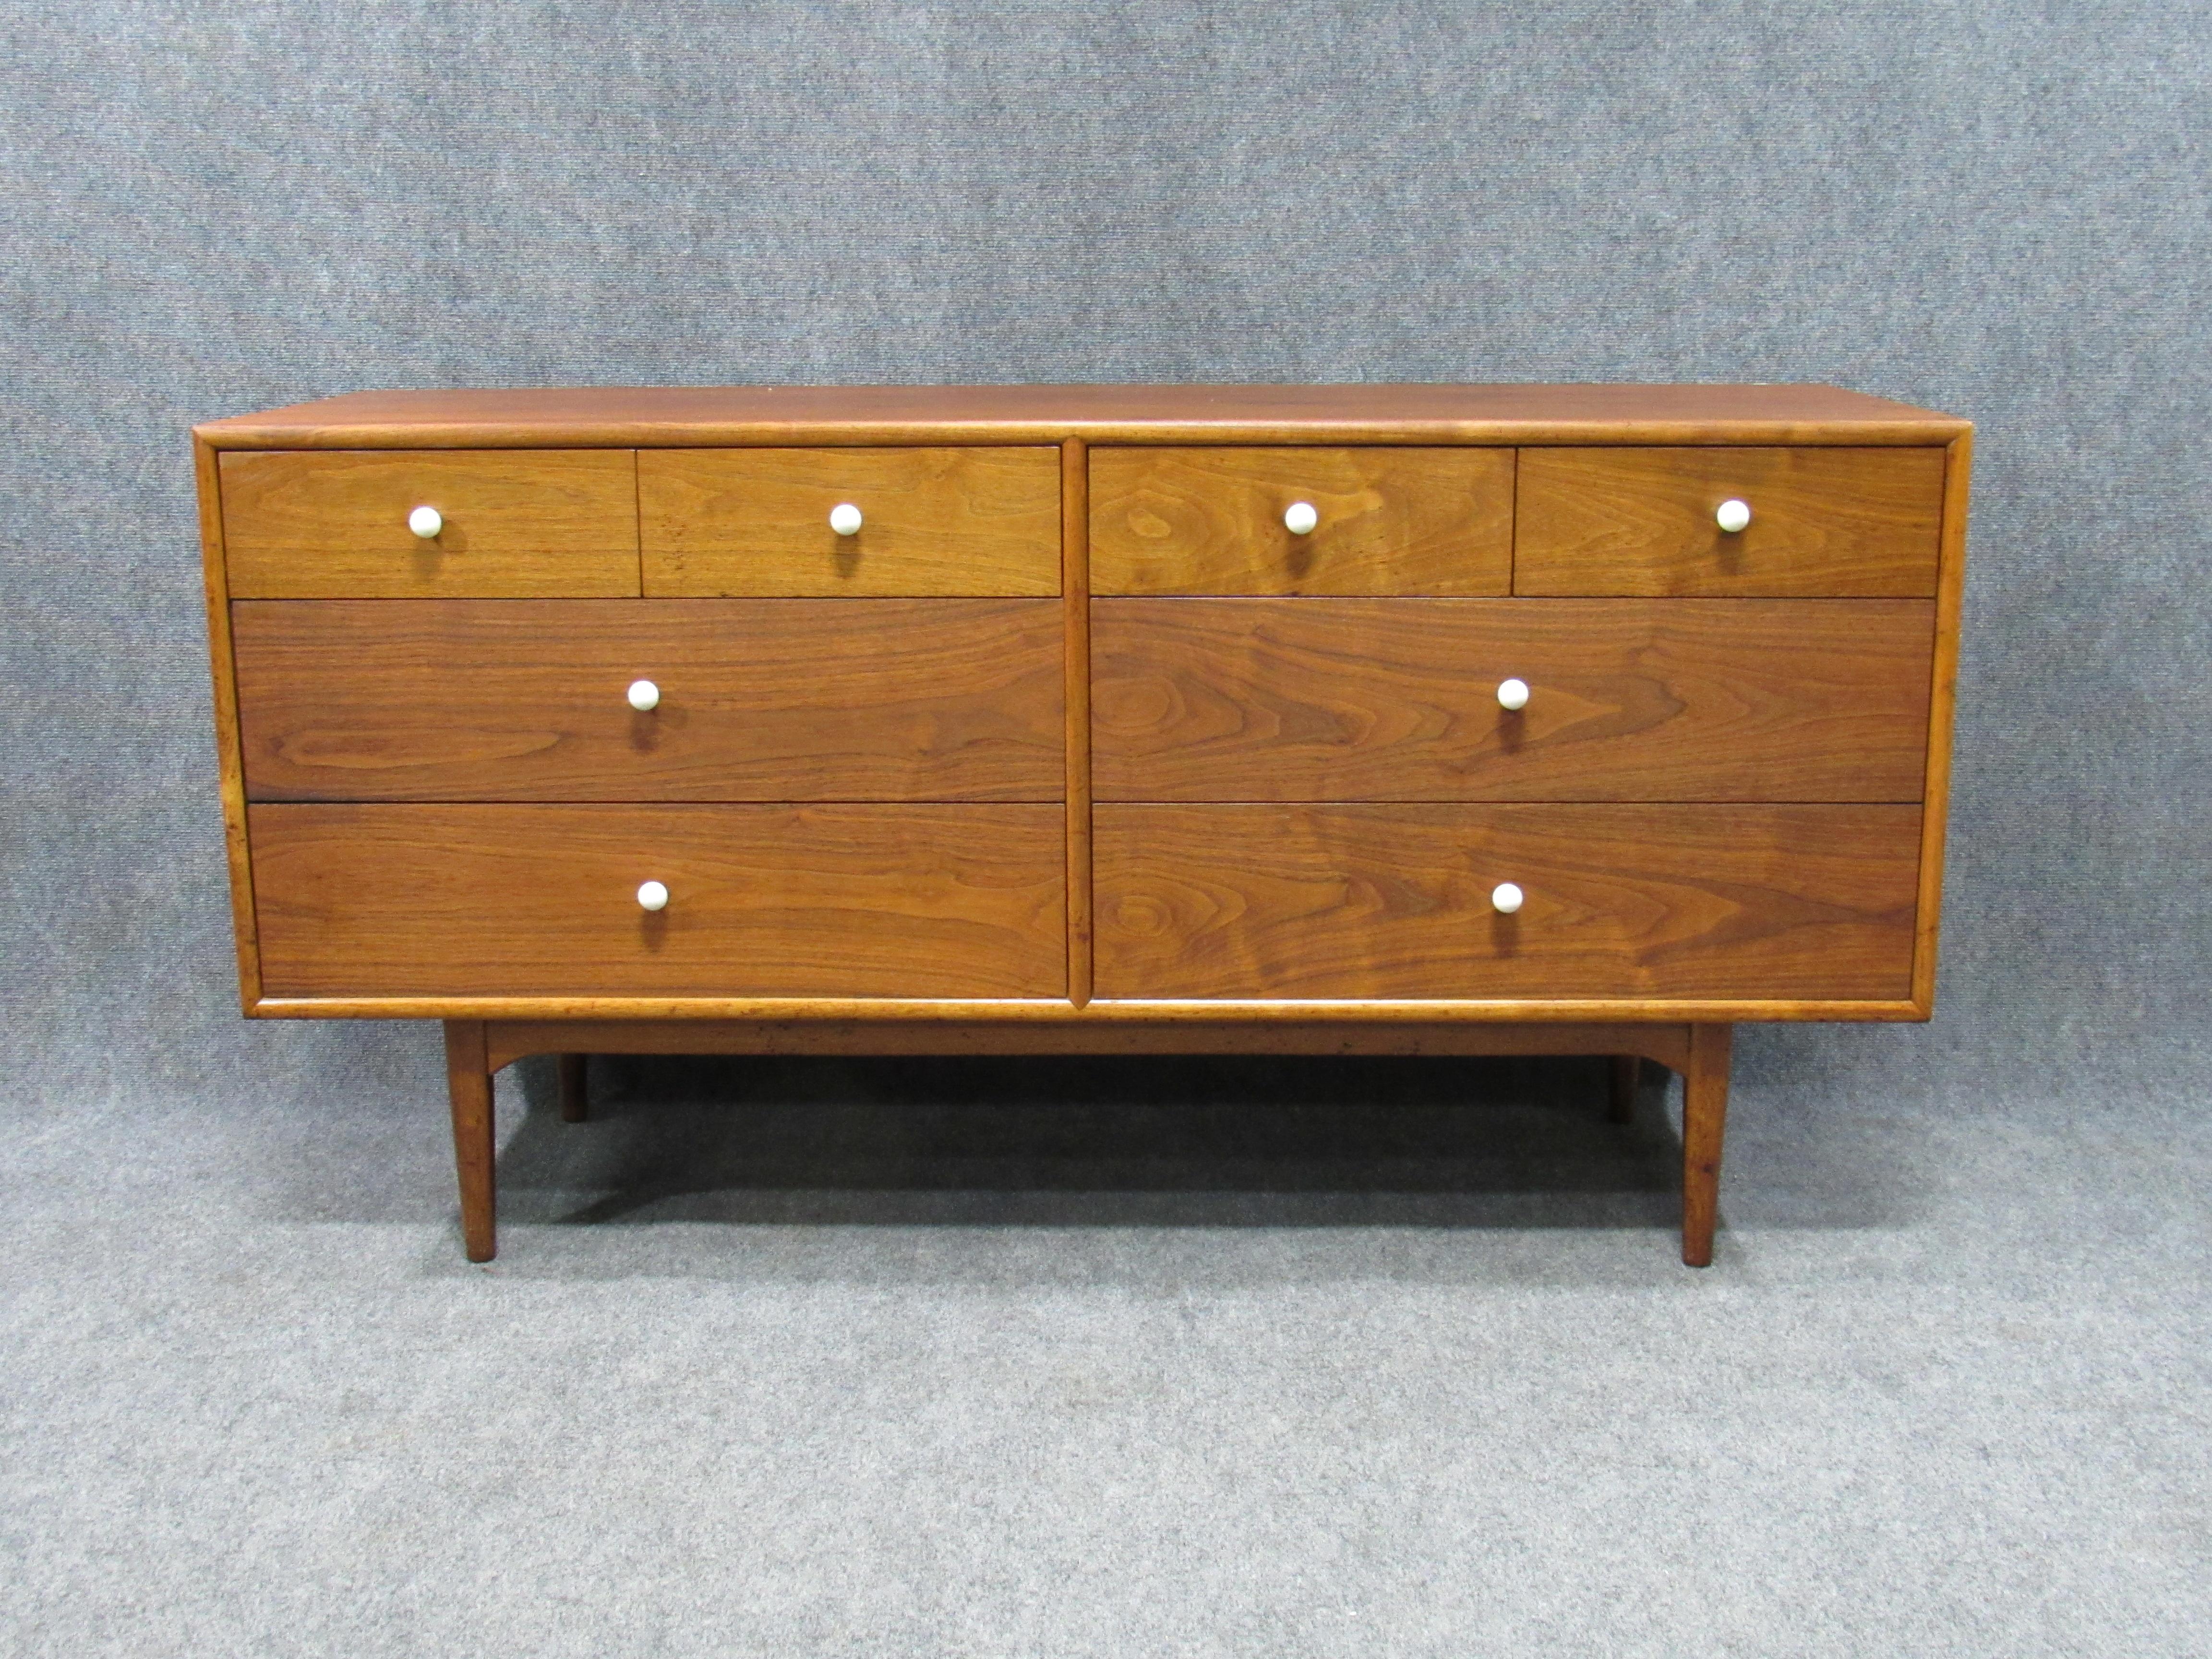 Midcentury walnut low and long chest of drawers by Kipp Stewart for Drexel. Excellent professionally restored vintage condition.